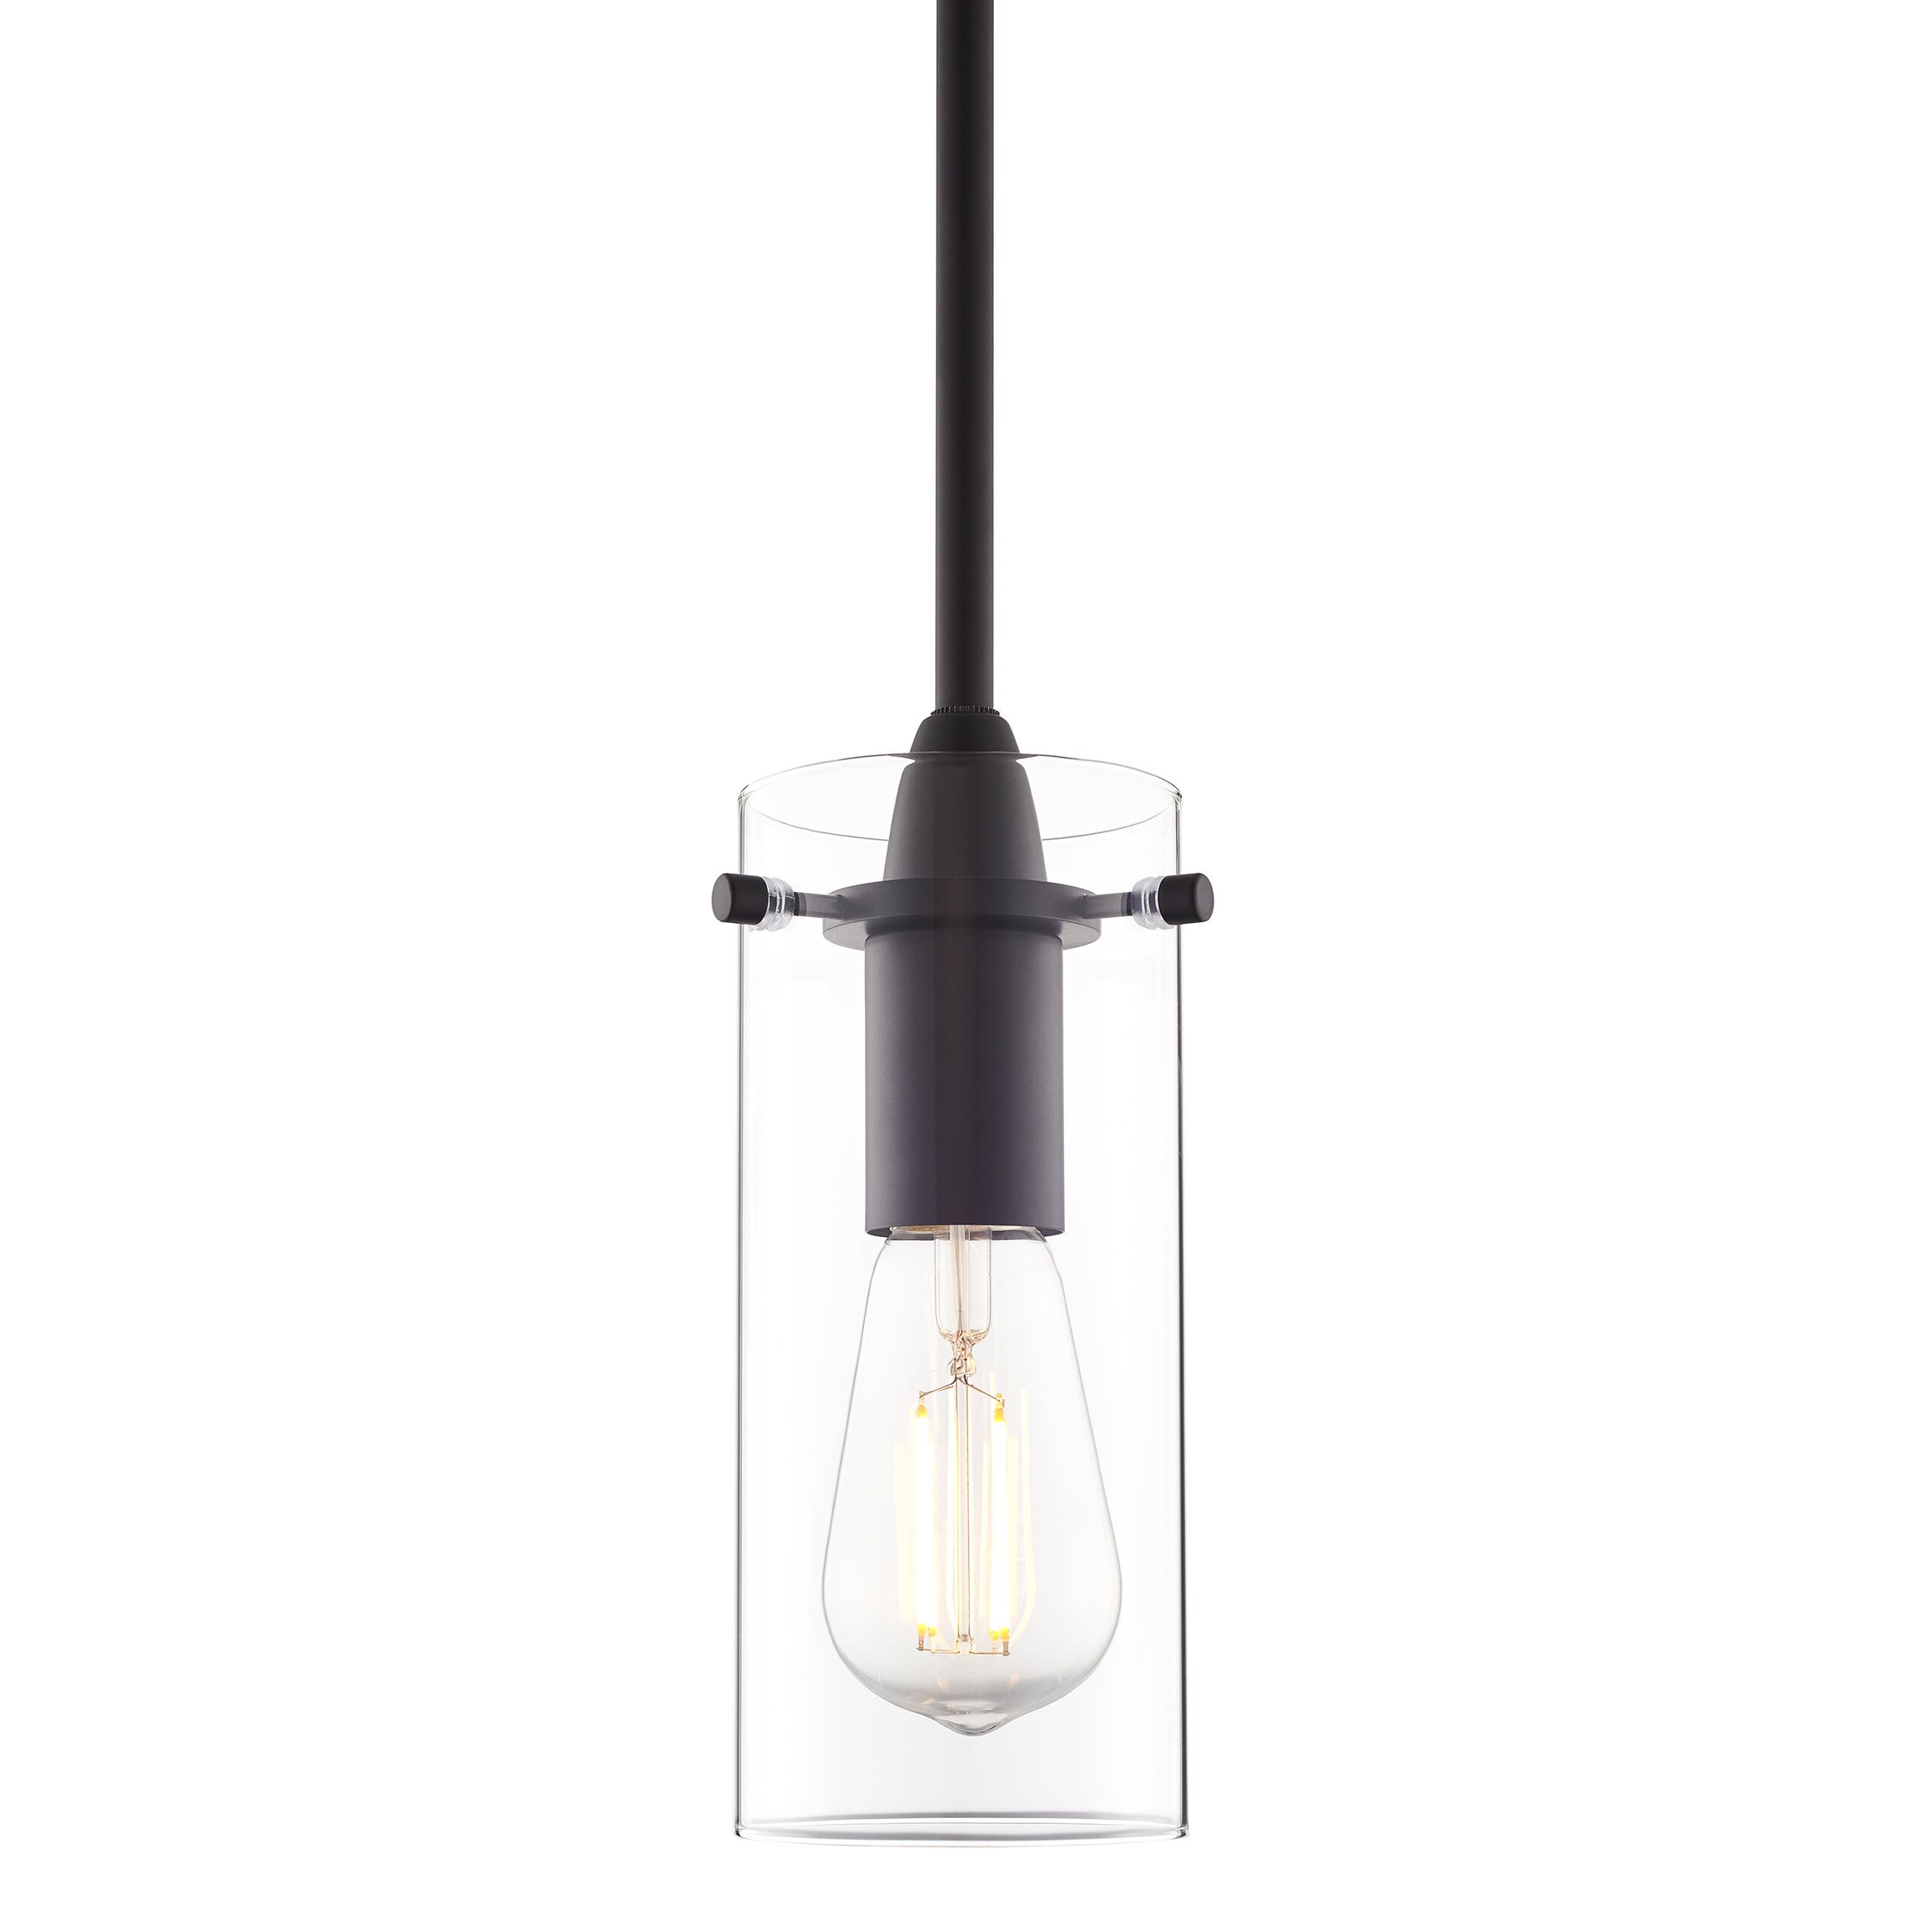 Angelina 1 Light Single Cylinder Pendant Intended For Fashionable Sue 1 Light Single Jar Pendants (View 5 of 20)